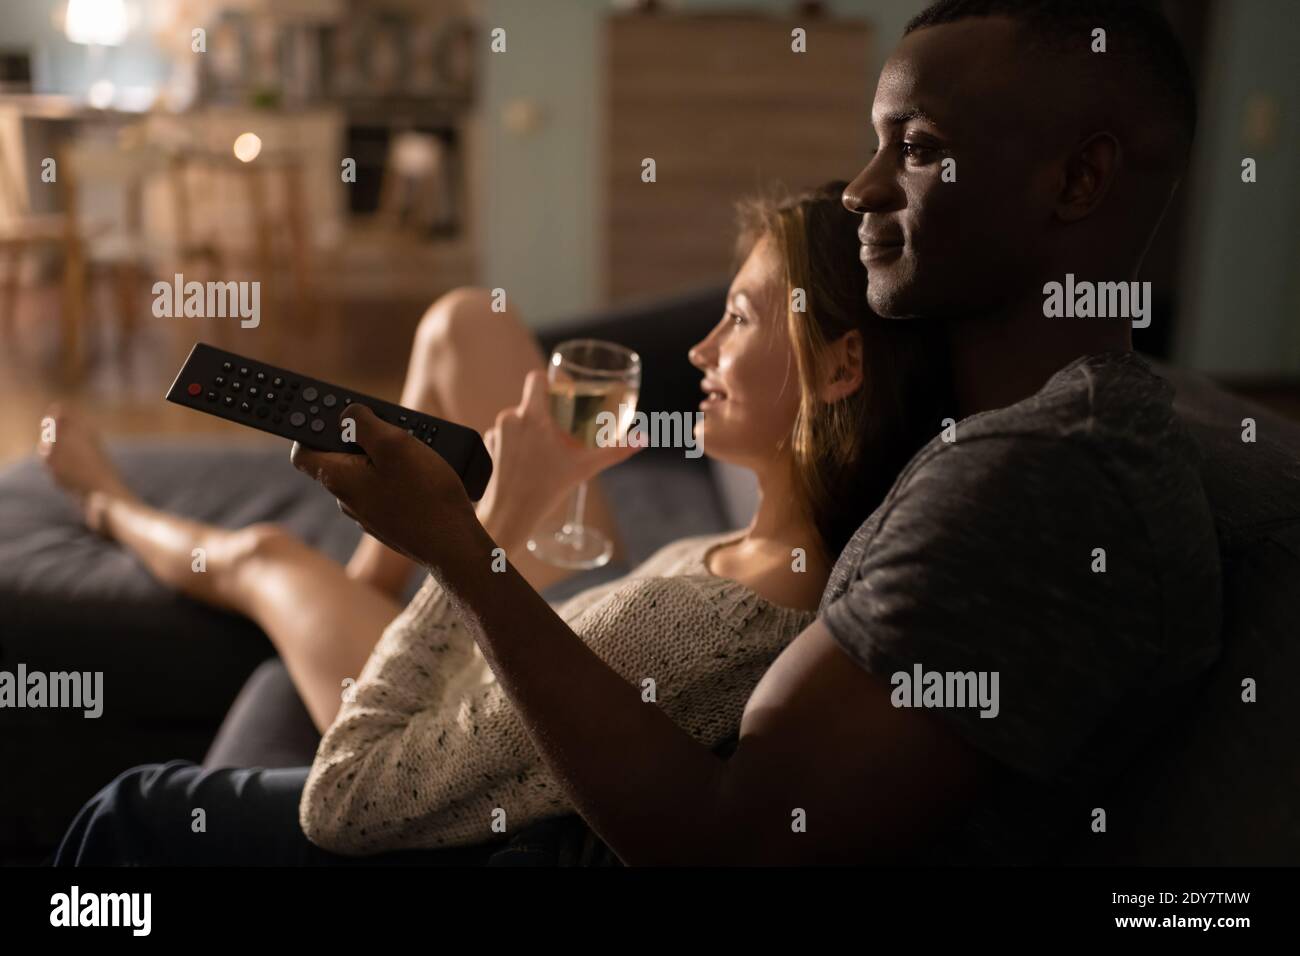 Black man changing channels on TV and embracing girlfriend with wine while relaxing on sofa at home Stock Photo